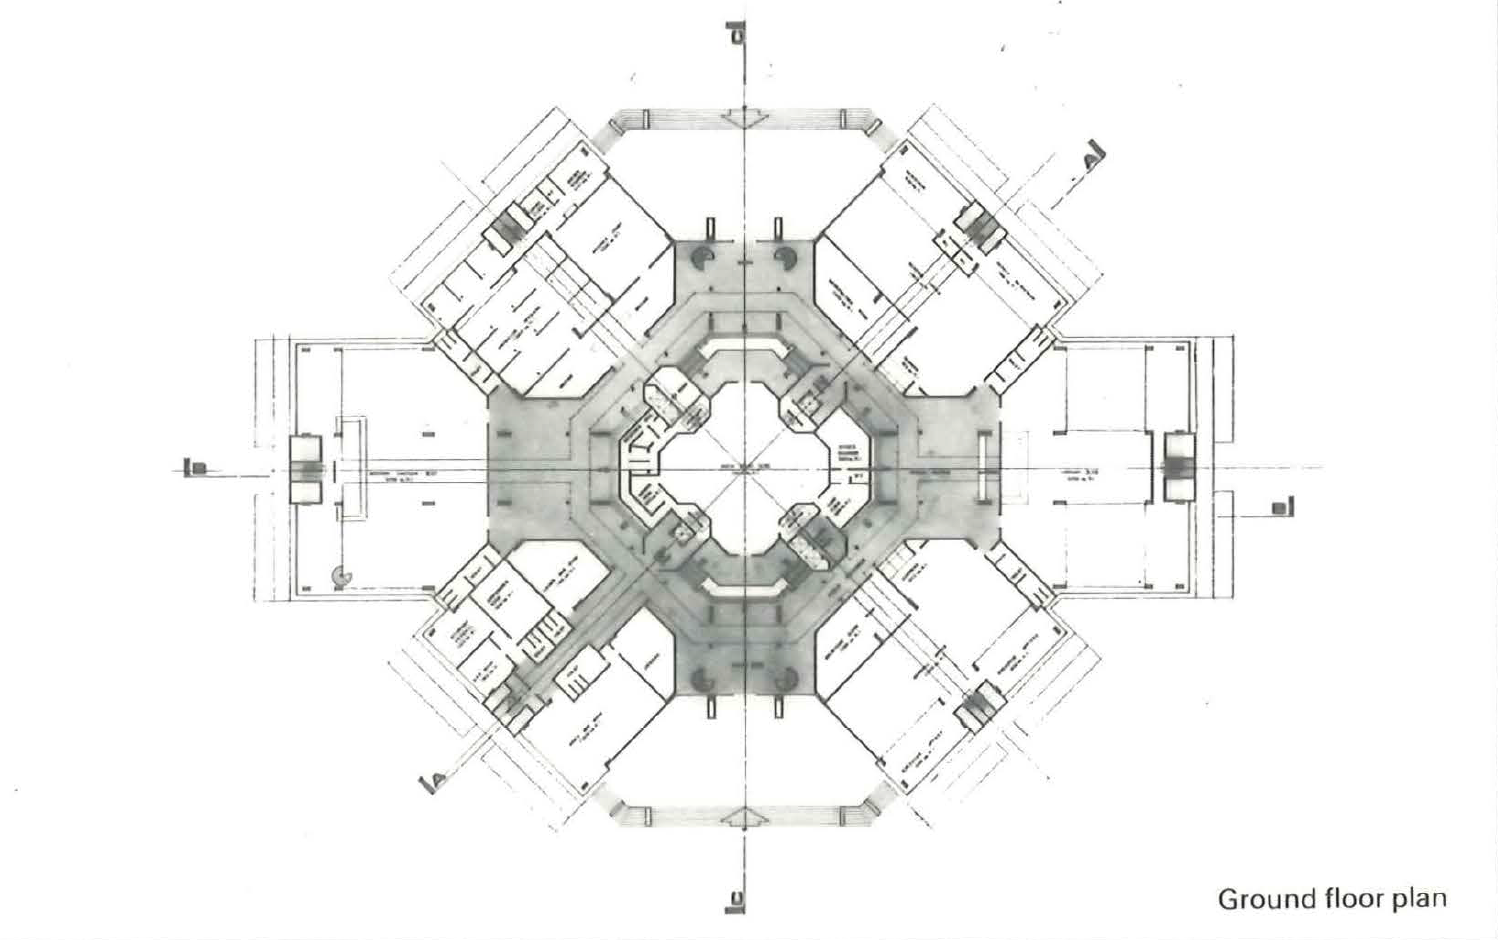 Plan of the Subordinate Law Court. Source: Promotional brochure of the firm in the author's collection.